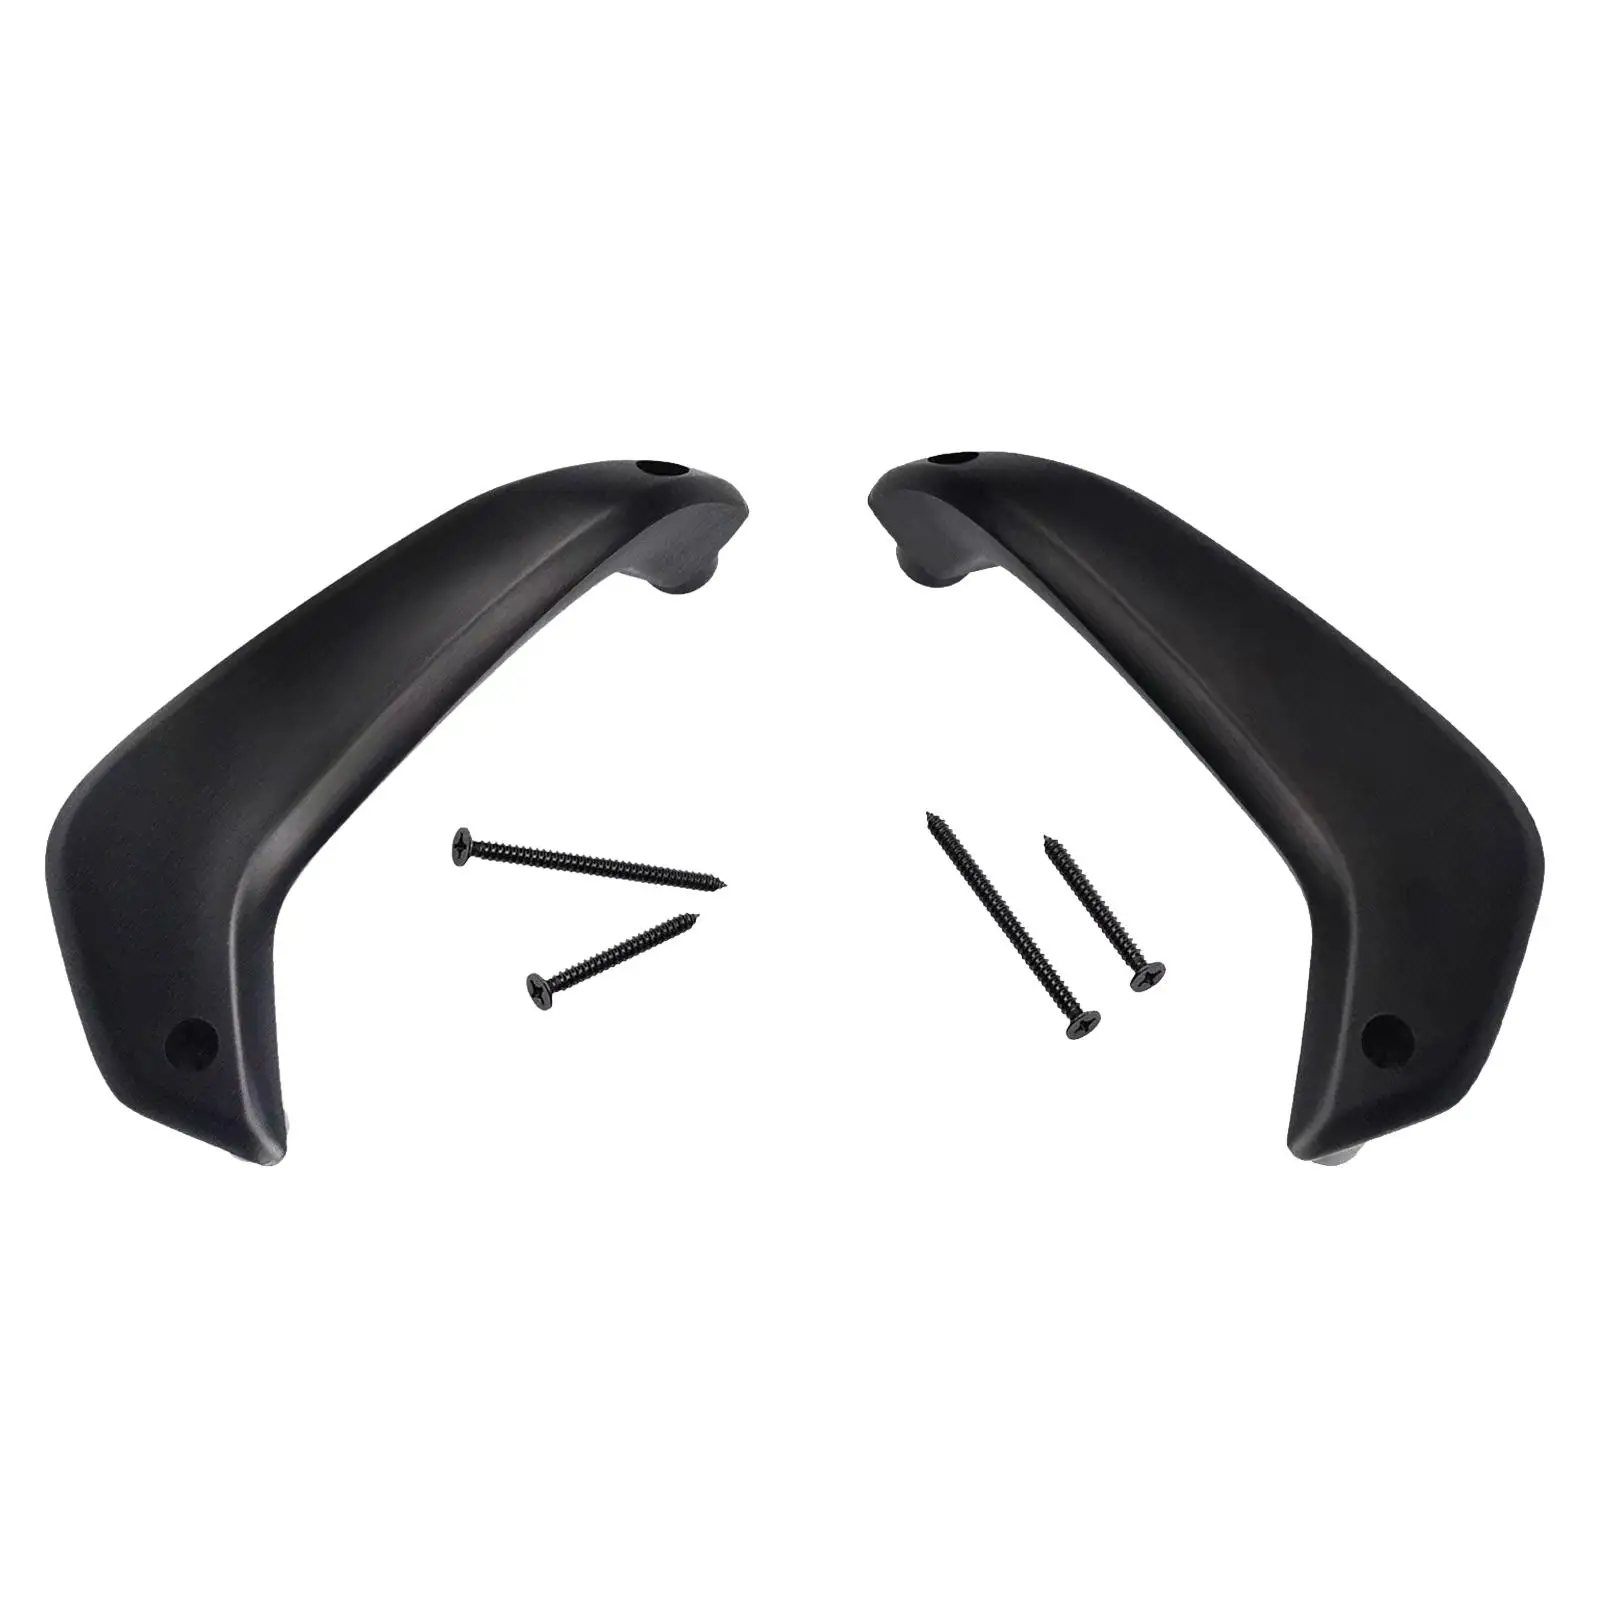 Inside Door Handle Replacement Parts with 2 Screws ,Easy to Install, Vehicle Parts for Fiesta Black